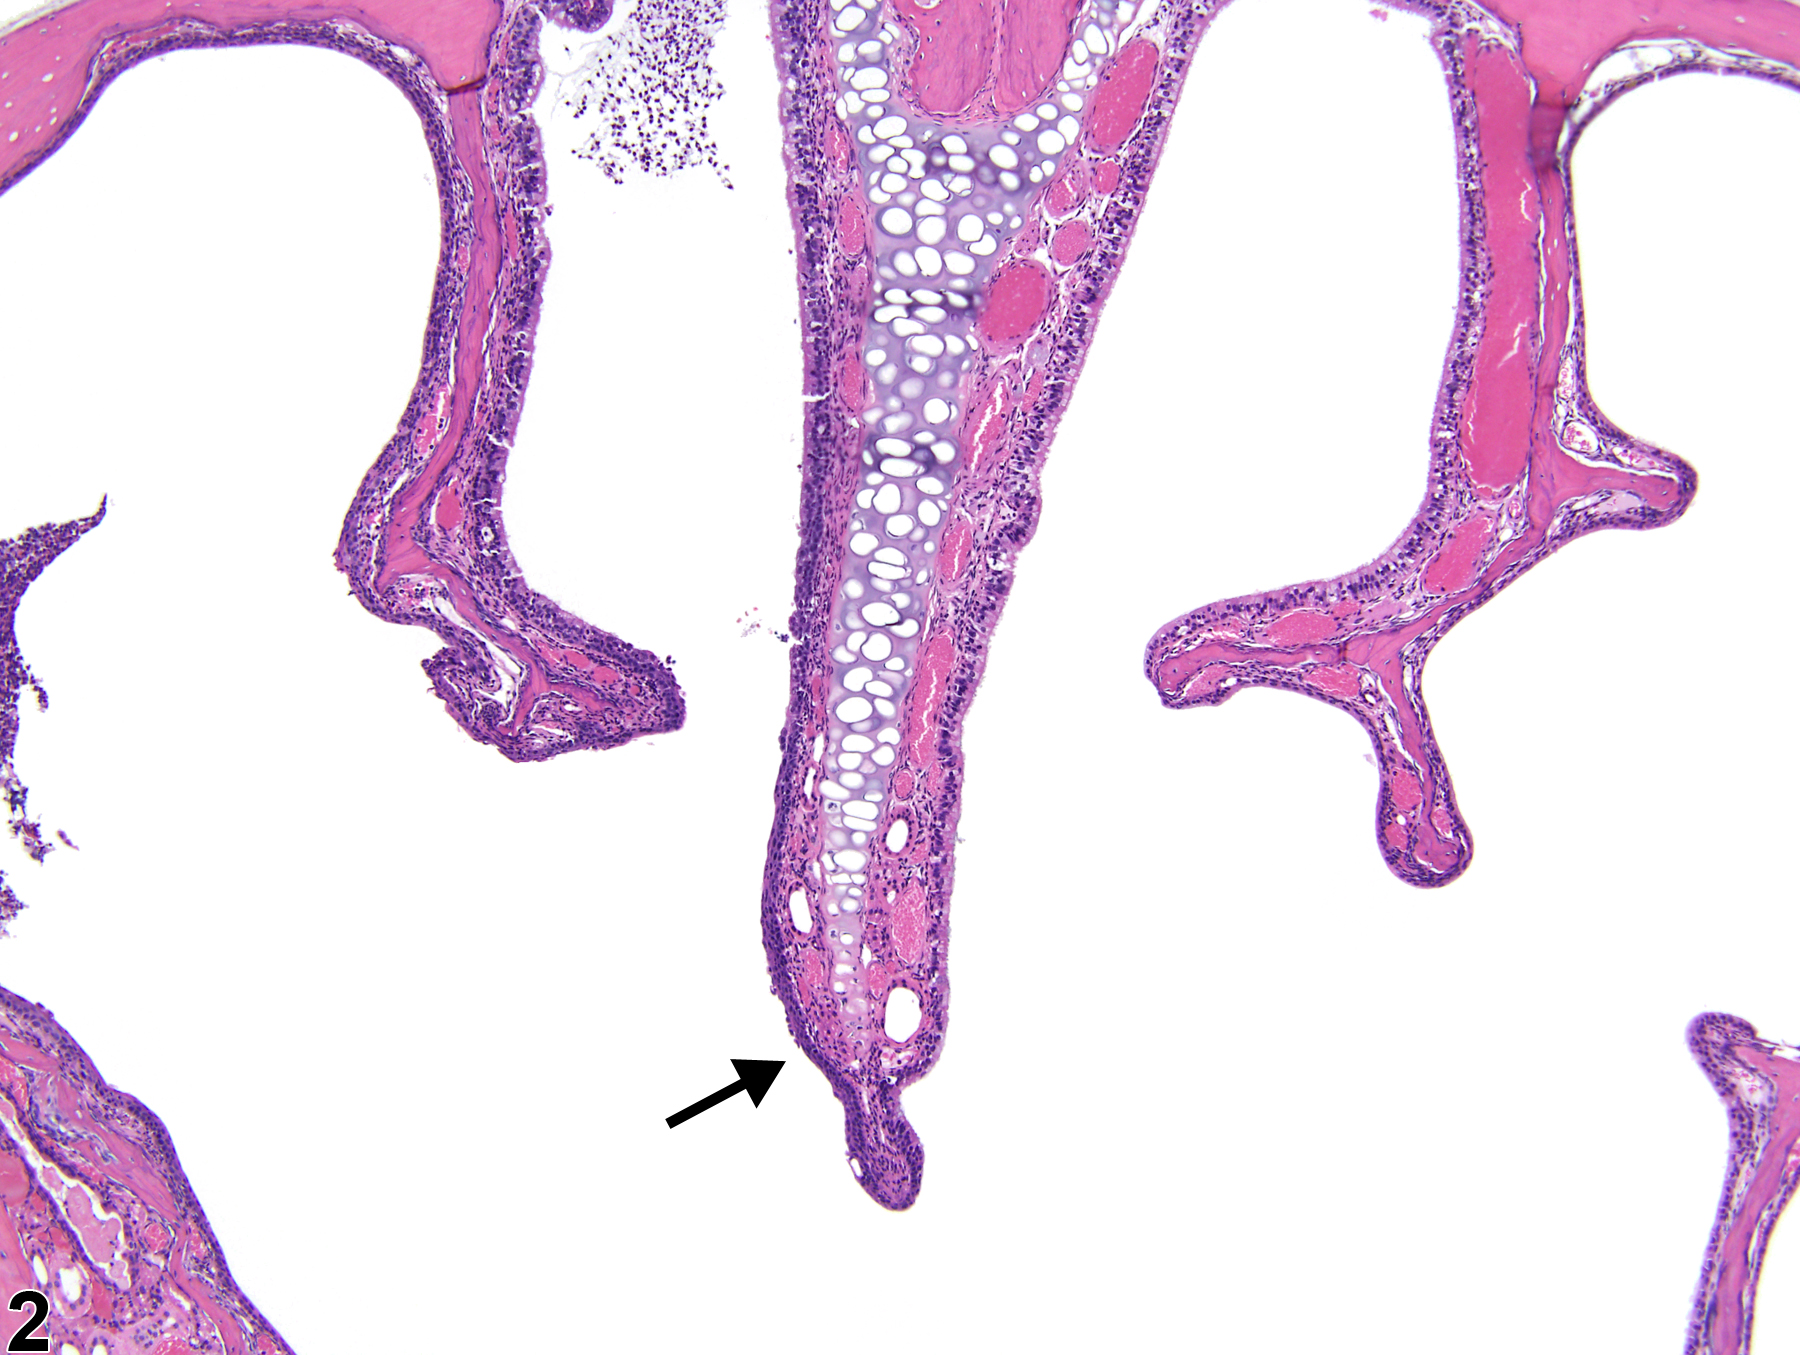 Image of perforation in the nose, septum from a female B6C3F1/N mouse in a chronic study